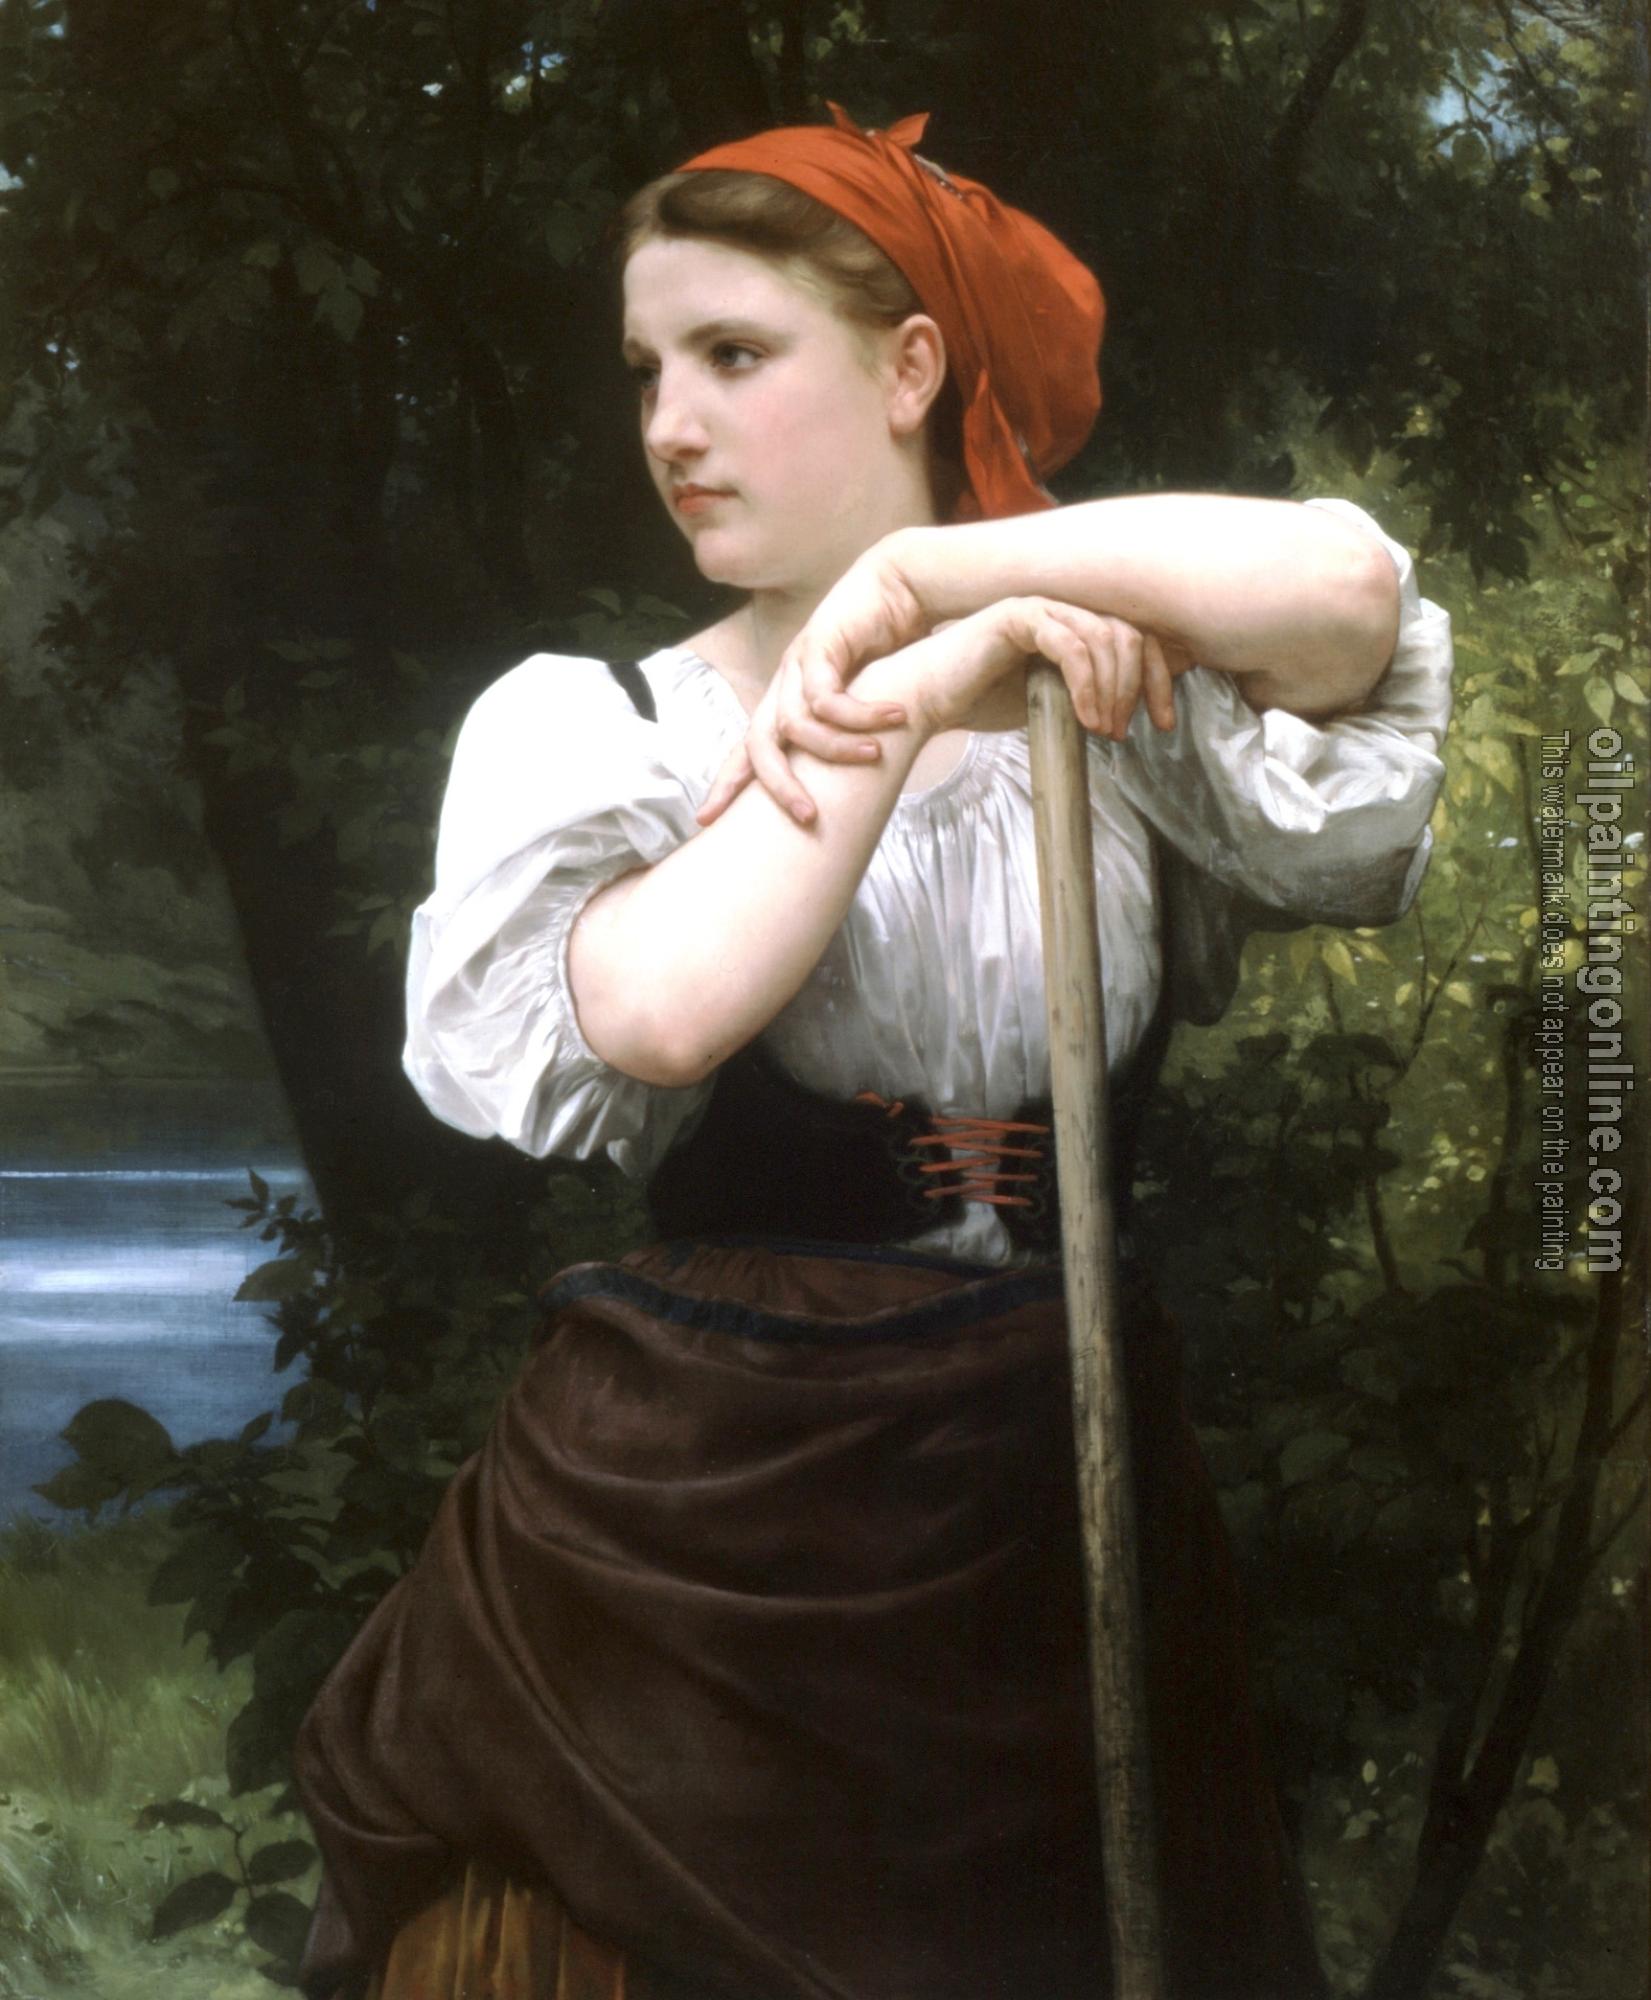 Bouguereau, William-Adolphe - The Haymaker